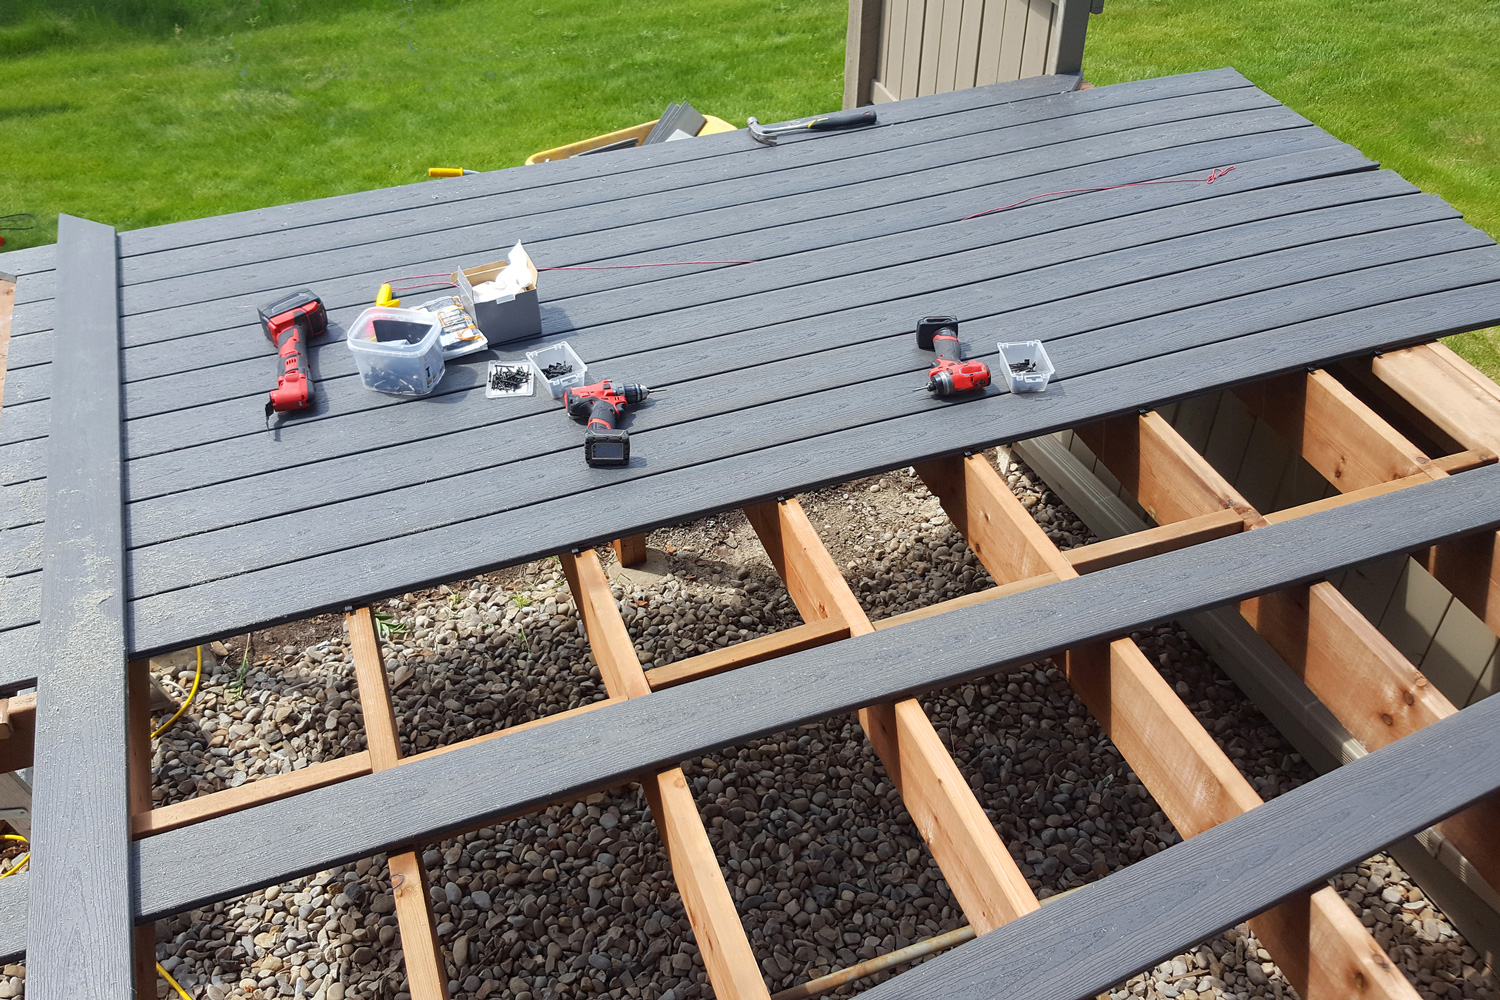 New deck constructed from a Composite Decking Material. PVC Gray plastic with a wood grain. Supports and beams are real wood,cedar.